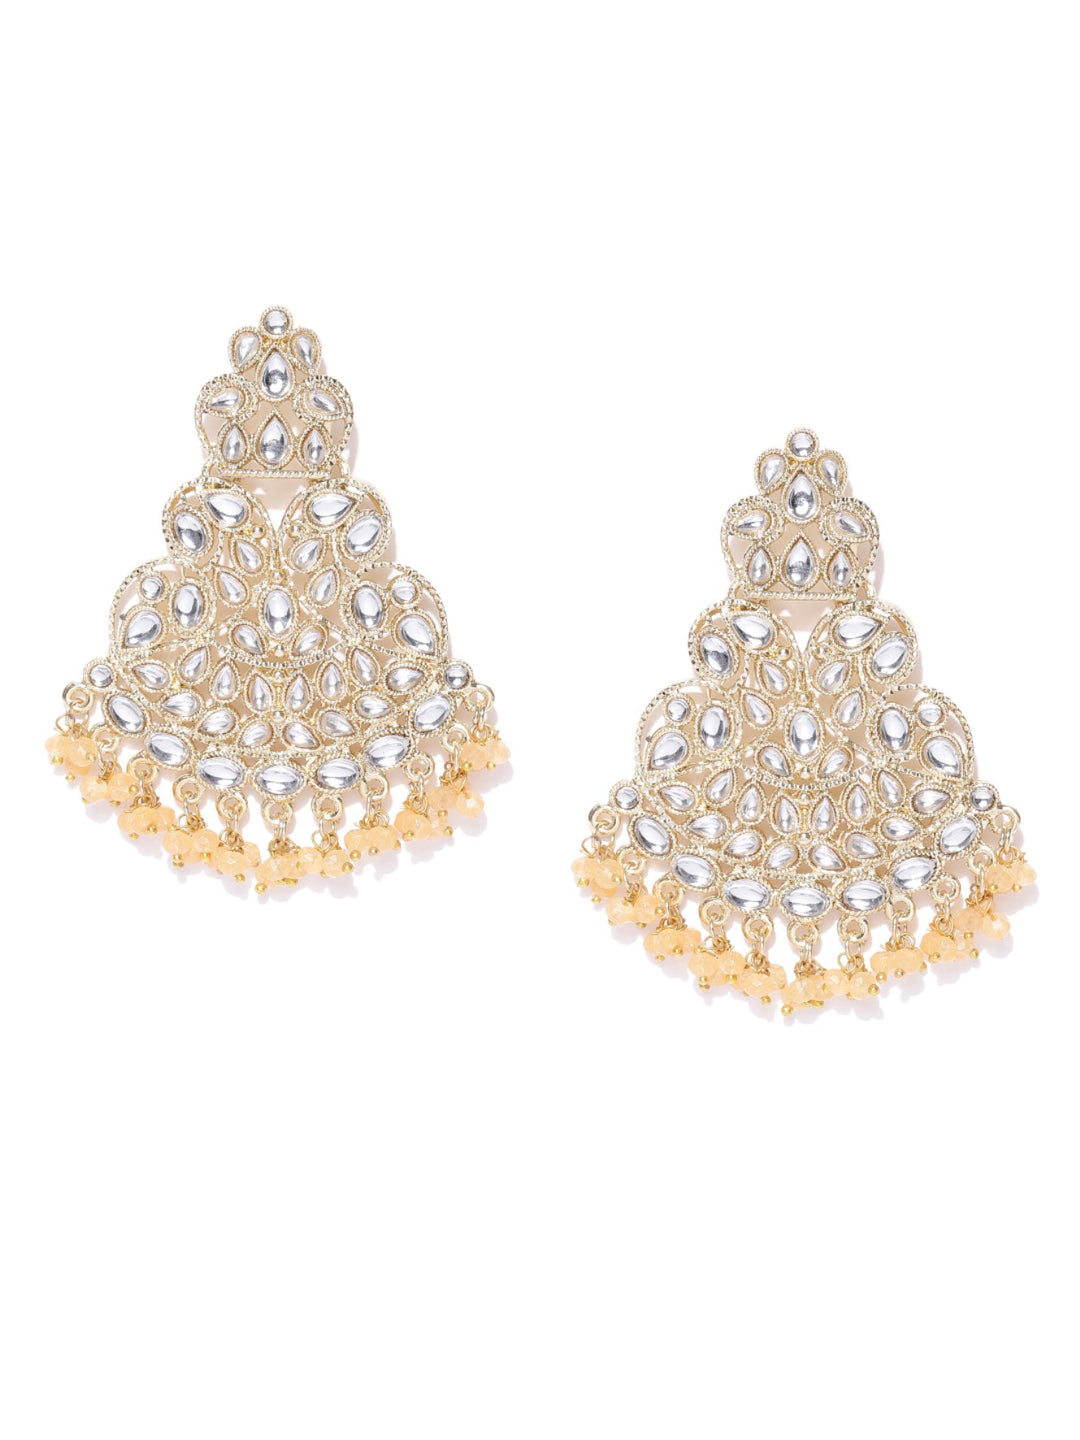 Designer Gold Plated Kundan Earrings With Peach Beads For Women And Girls